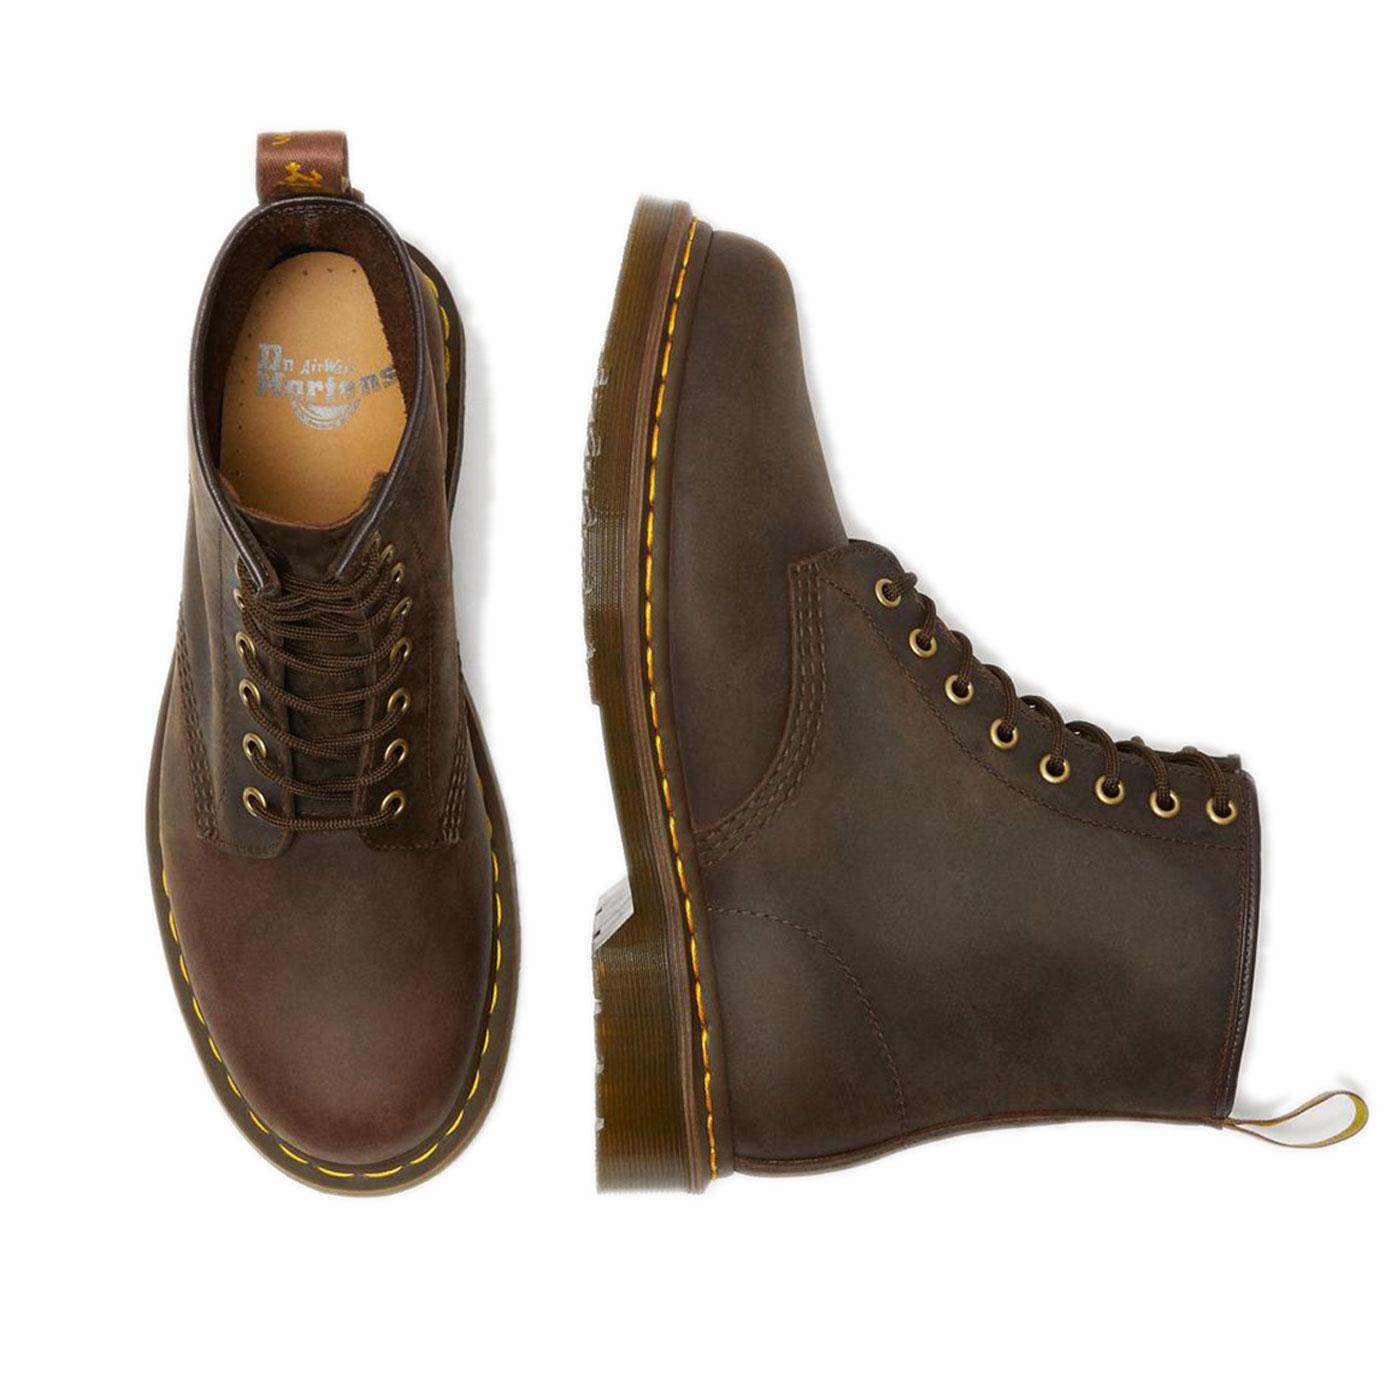 DR MARTENS 1460 Gaucho Retro 60s Leather Ankle Boots